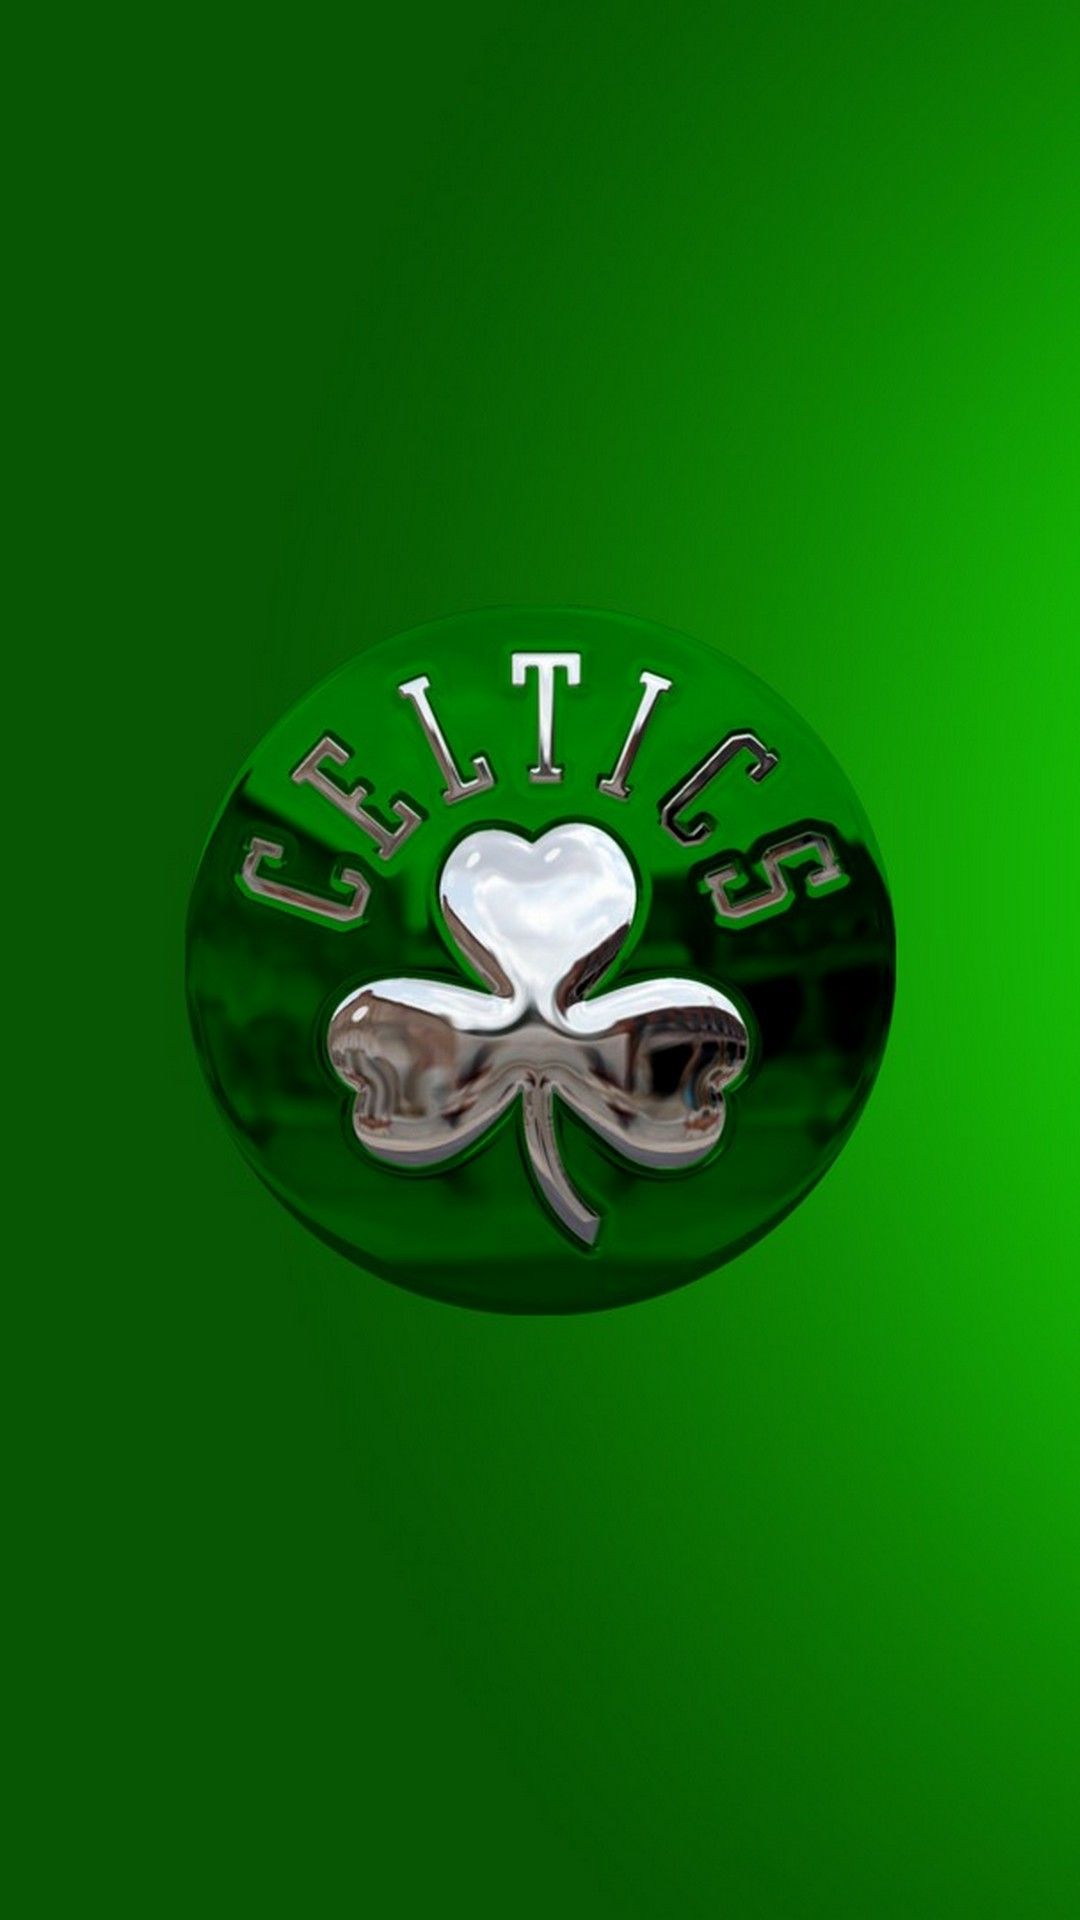 Free download Boston Celtics Wallpaper For Android 2020 Android Wallpaper [1080x1920] for your Desktop, Mobile & Tablet. Explore Celtics 2020 Wallpaper. Celtics Wallpaper, Celtics Wallpaper, Boston Celtics Wallpaper